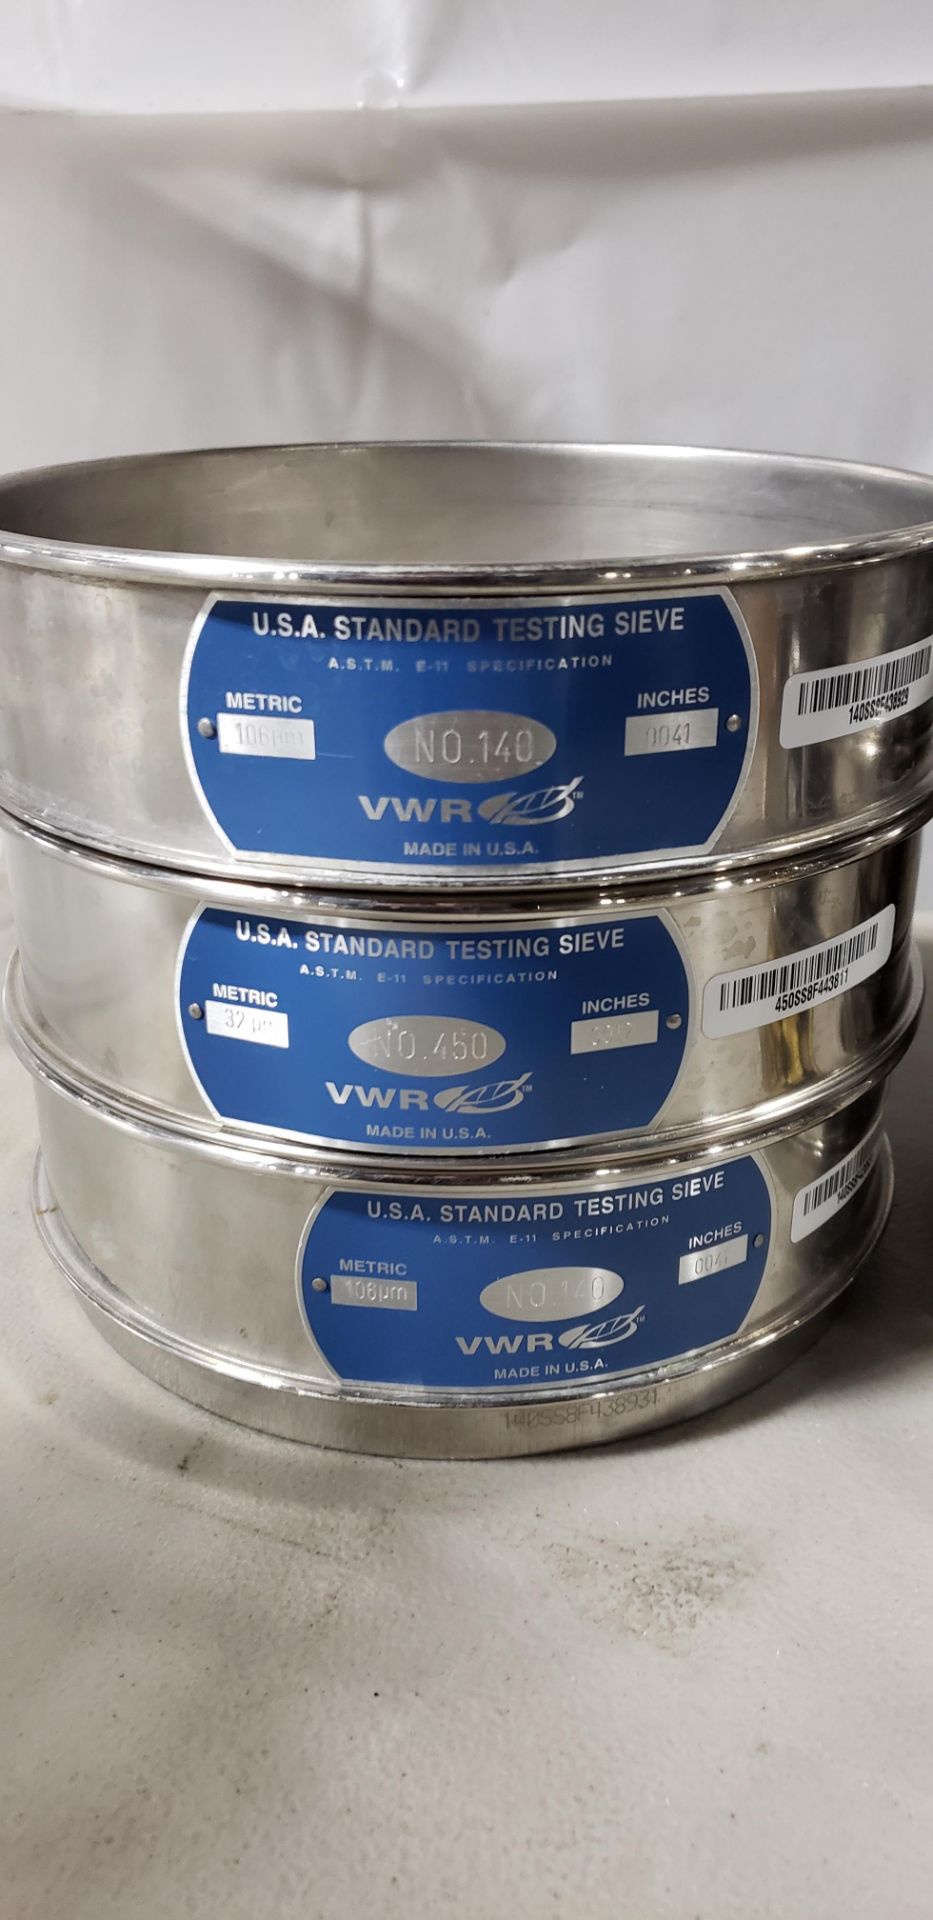 Lot of 17 USA Standard Test Sieves - Image 6 of 6